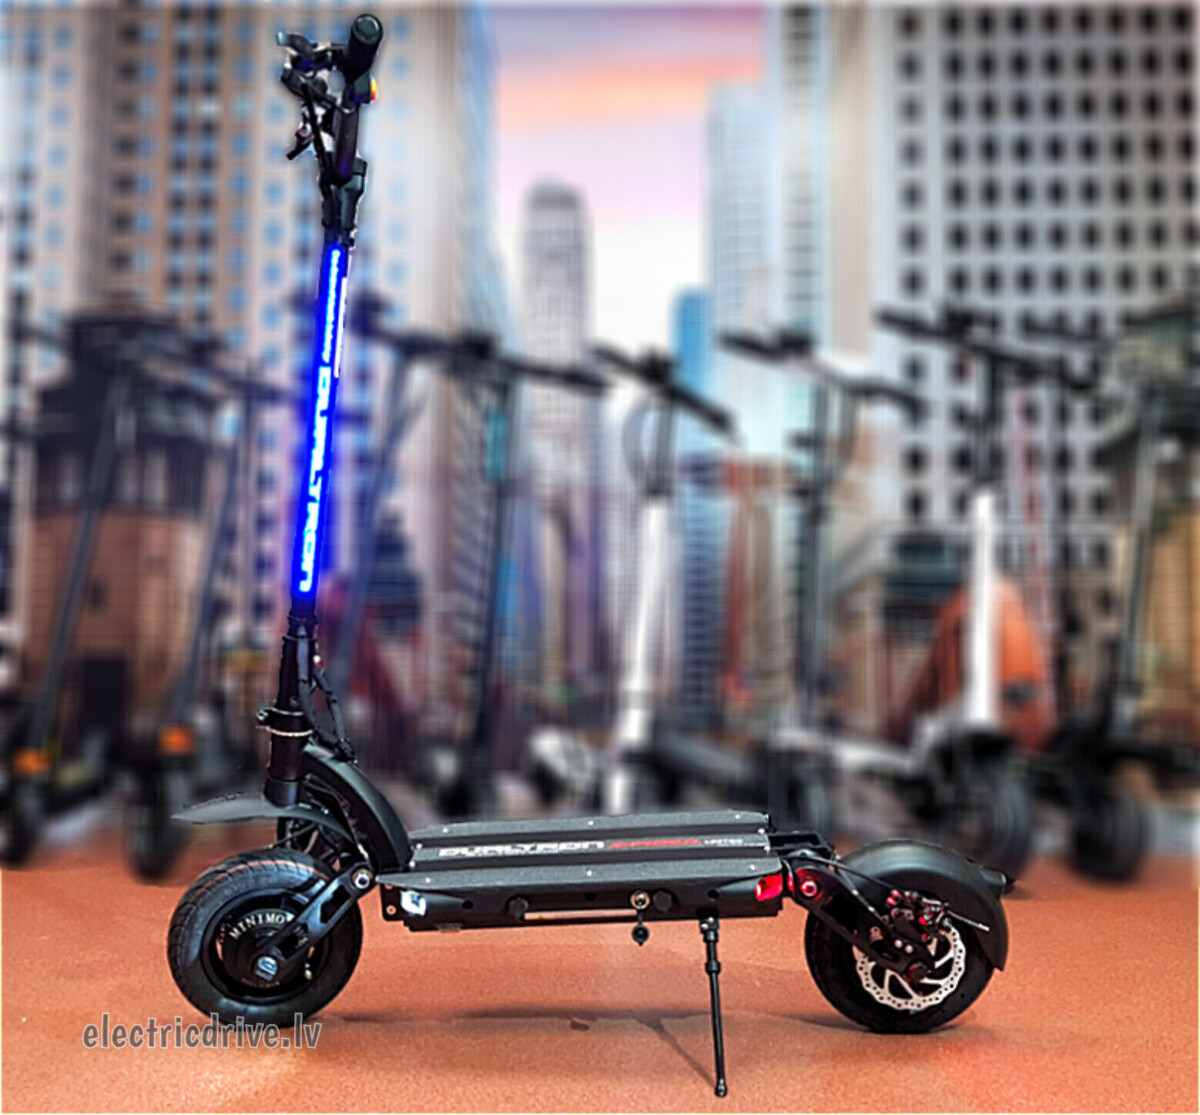 DUALTRON “MINI”, THE HOTRODS OF ELECTRIC SCOOTER( PLEASE NOTE: THIS SCOOTER IS FOR OFF ROAD USE ONLY )